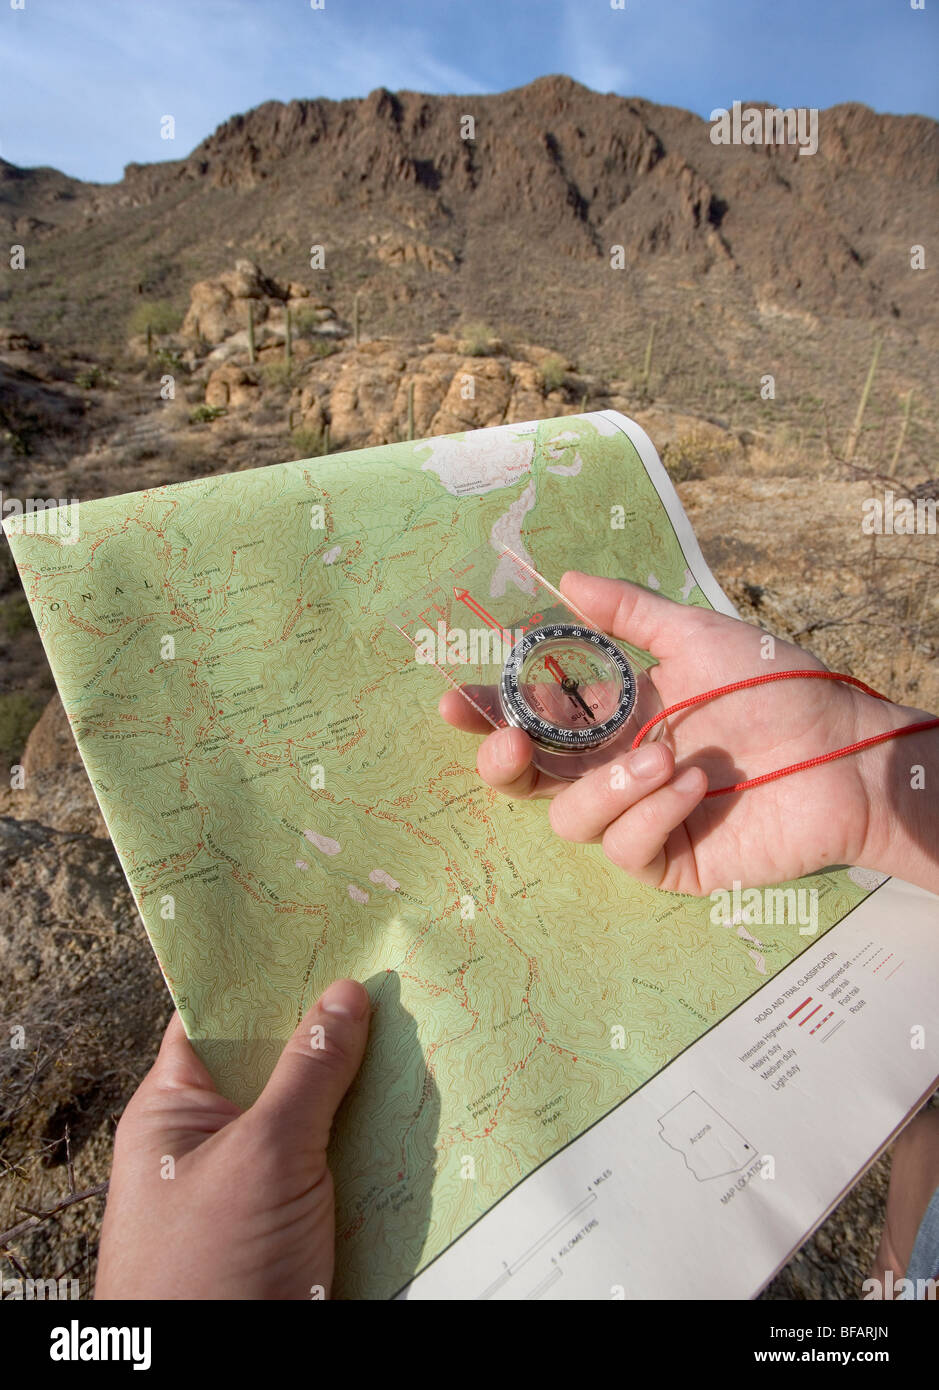 A hiking compass on a Topo map Stock Photo